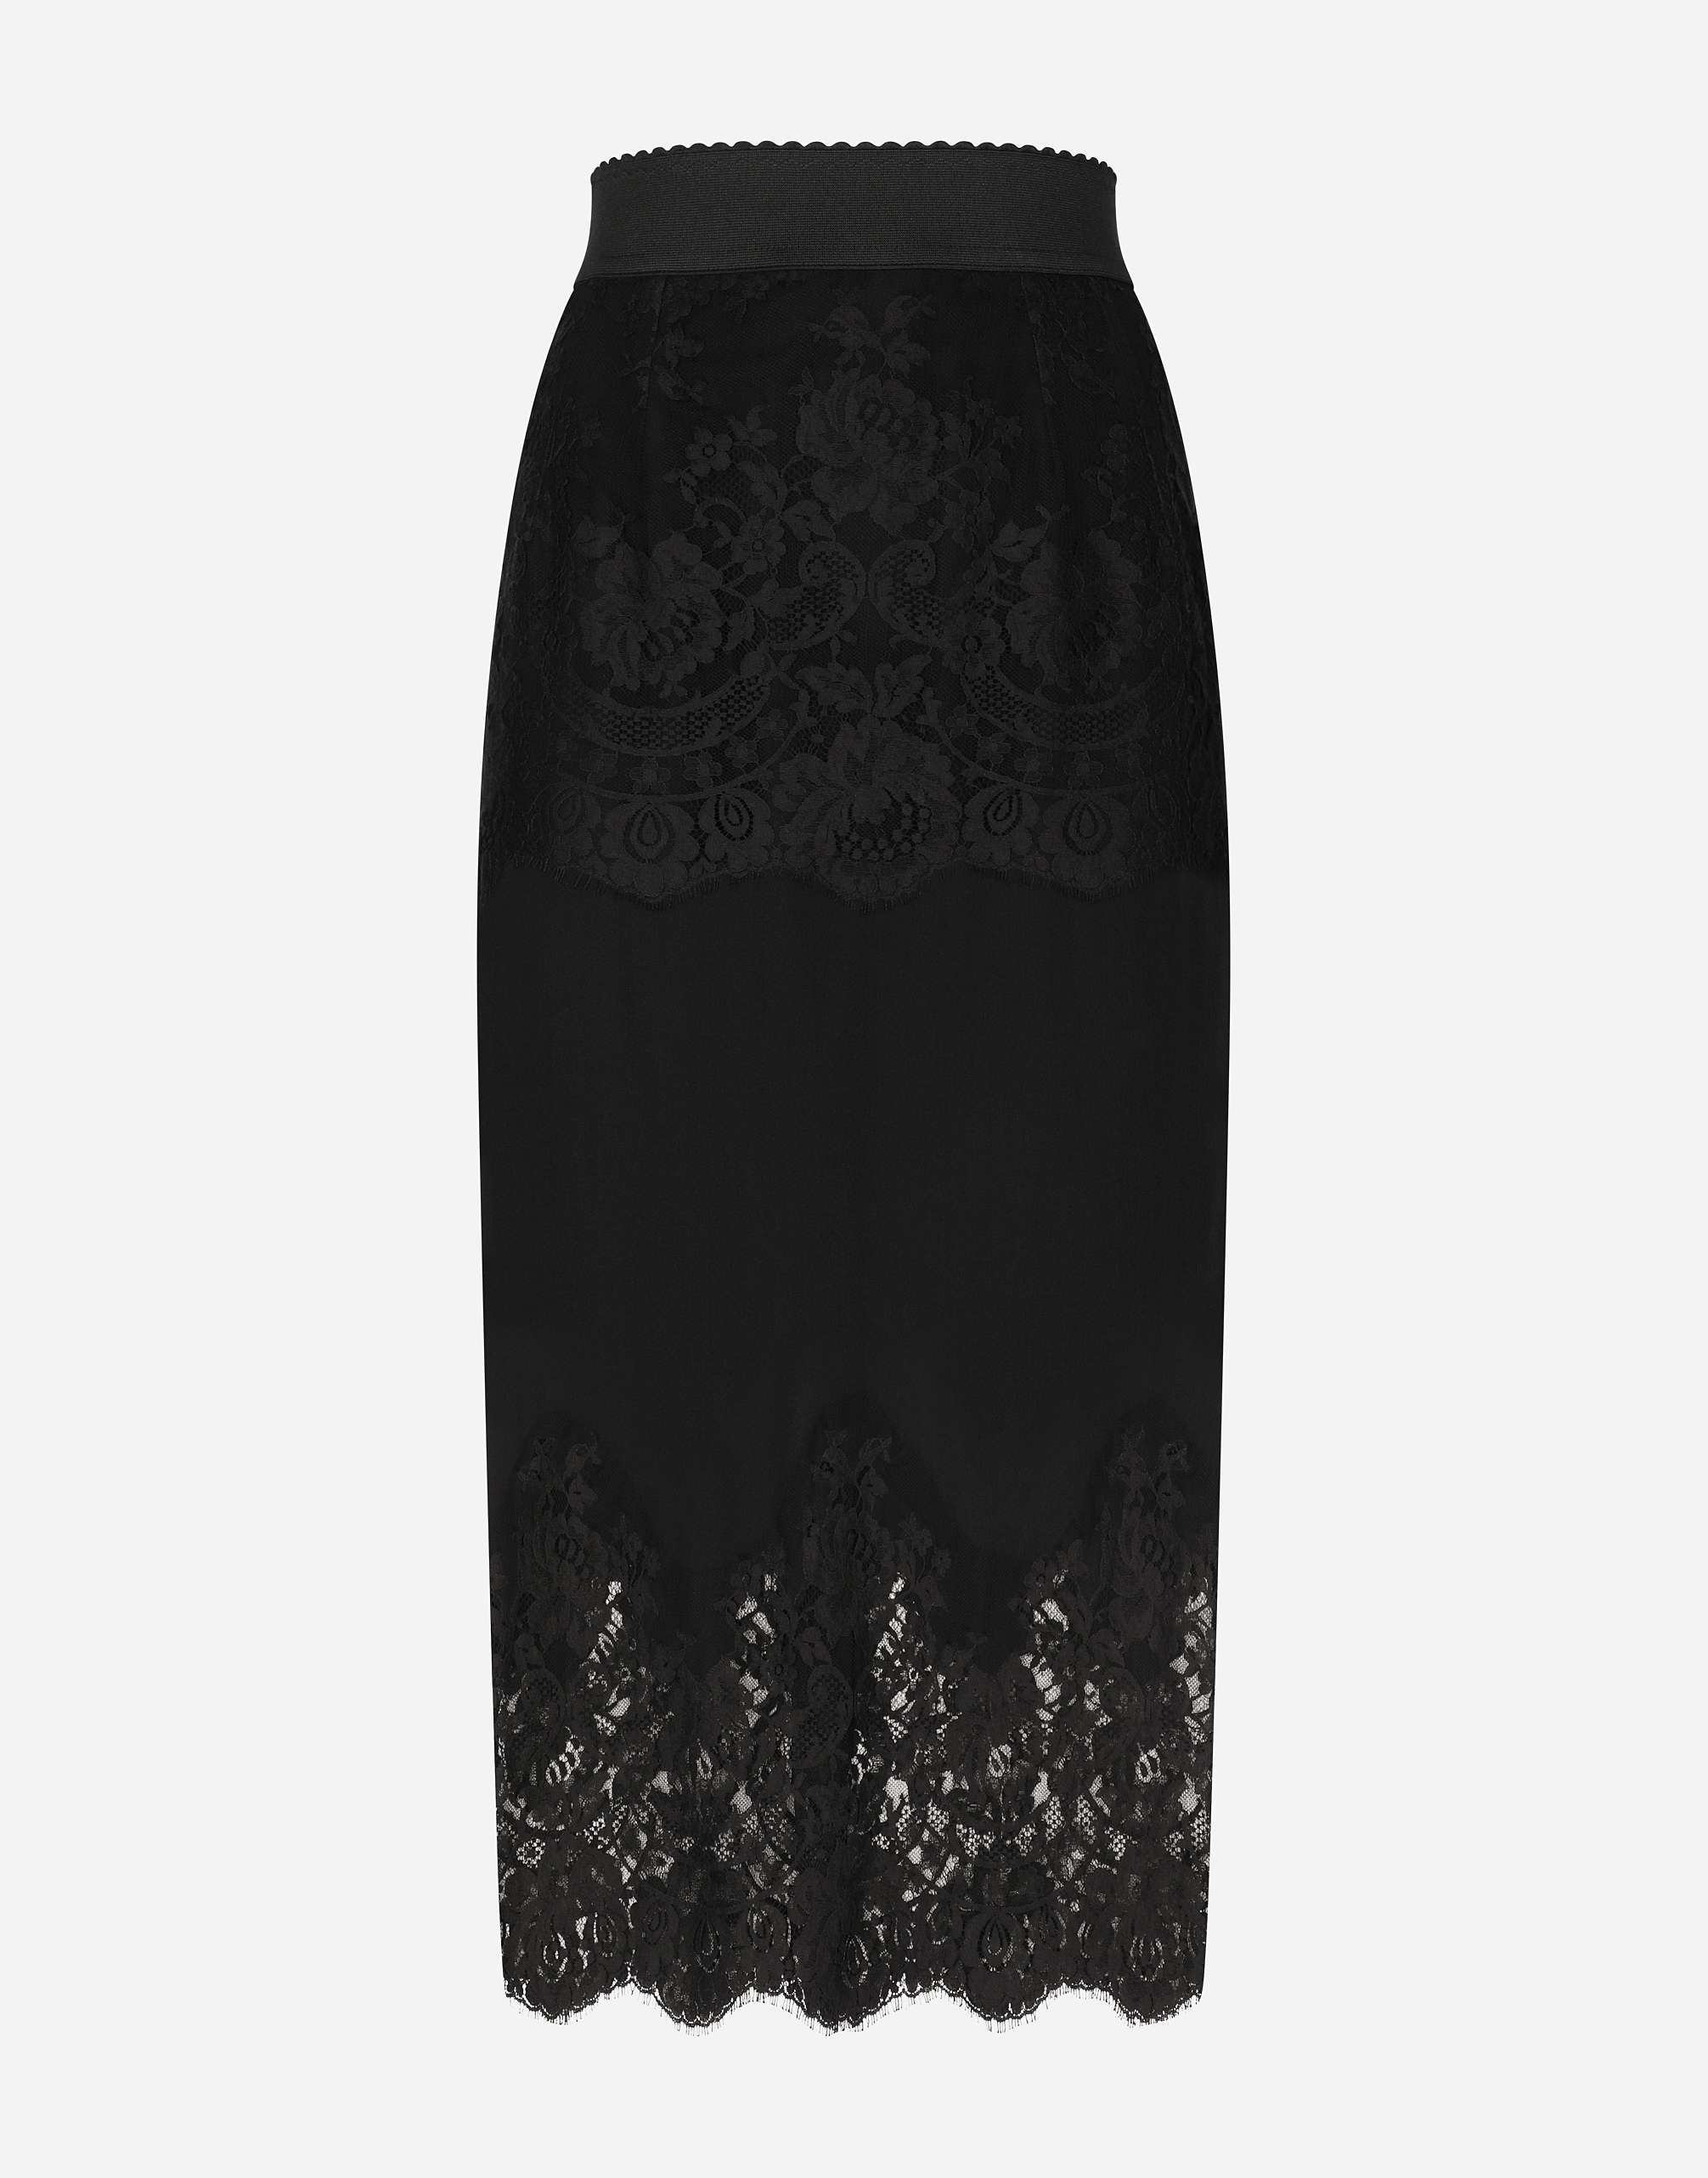 DOLCE & GABBANA CREPE DE CHINE MIDI SKIRT WITH LACE DETAILS